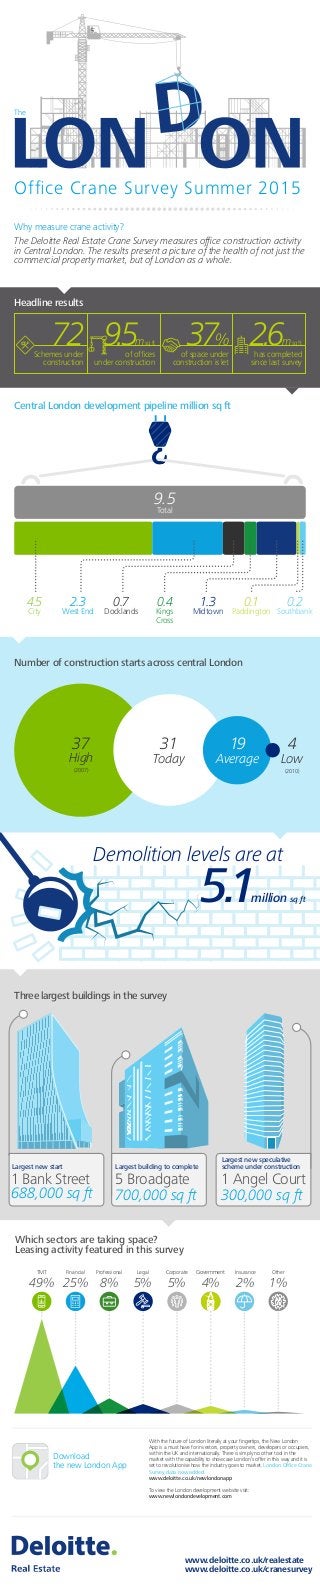 Ofﬁce Crane Survey Summer 2015
The
Why measure crane activity?
The Deloitte Real Estate Crane Survey measures ofﬁce construction activity
in Central London. The results present a picture of the health of not just the
commercial property market, but of London as a whole.
Headline results
72Schemes under
construction
9.5msqft
of ofﬁces
under construction
37%
of space under
construction is let
2.6msqft
has completed
since last survey
0.4
Kings
Cross
1.3
Midtown
0.1
Paddington
0.7
Docklands
0.2
Southbank
2.3
West End
4.5
City
9.5
Total
Central London development pipeline million sq ft
Number of construction starts across central London
37
High
(2007)
4
Low
(2010)
31
Today
19
Average
5.1
Demolition levels are at
million sq ft
Three largest buildings in the survey
Largest new start
1Bank Street
688,000 sq ft
Largest new speculative
scheme under construction
1 Angel Court
300,000 sq ft
Largest building to complete
5 Broadgate
700,000 sq ft
Which sectors are taking space?
Leasing activity featured in this survey
Insurance
2%
Government
4%
Corporate
5%
Legal
5%
Financial
25%
TMT
49%
Professional
8%
Other
1%
www.deloitte.co.uk/realestate
www.deloitte.co.uk/cranesurvey
Download
the new London App
With the future of London literally at your ﬁngertips, the New London
App is a must have for investors, property owners, developers or occupiers,
within the UK and internationally. There is simply no other tool in the
market with the capability to showcase London’s offer in this way and it is
set to revolutionise how the industry goes to market. London Ofﬁce Crane
Survey data now added.
www.deloitte.co.uk/newlondonapp
To view the London development website visit:
www.newlondondevelopment.com
 